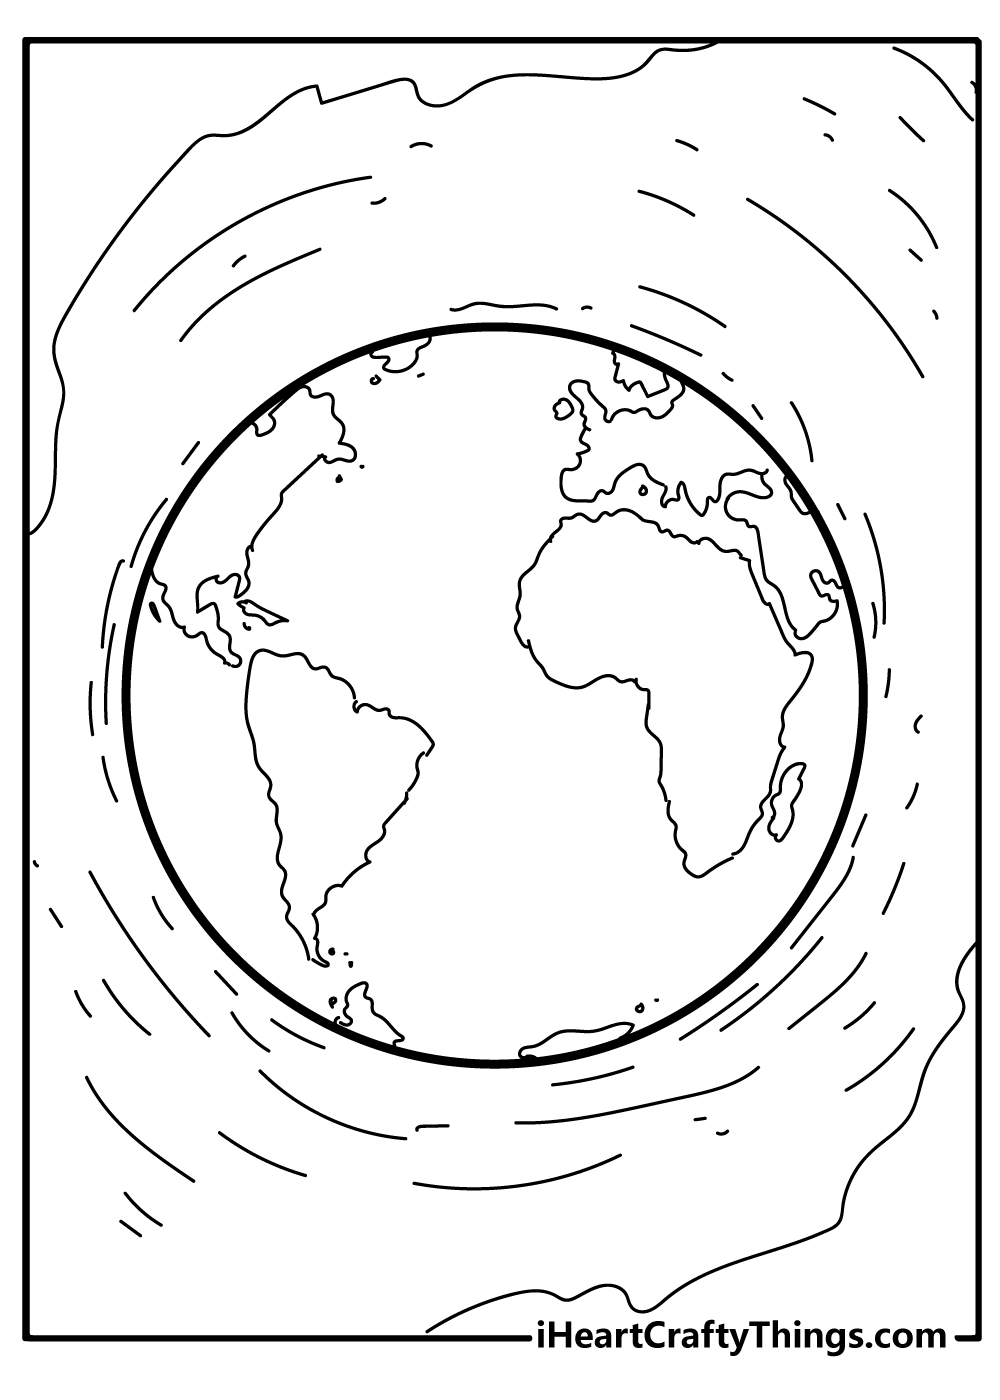 Planets Coloring Pages free pdf download